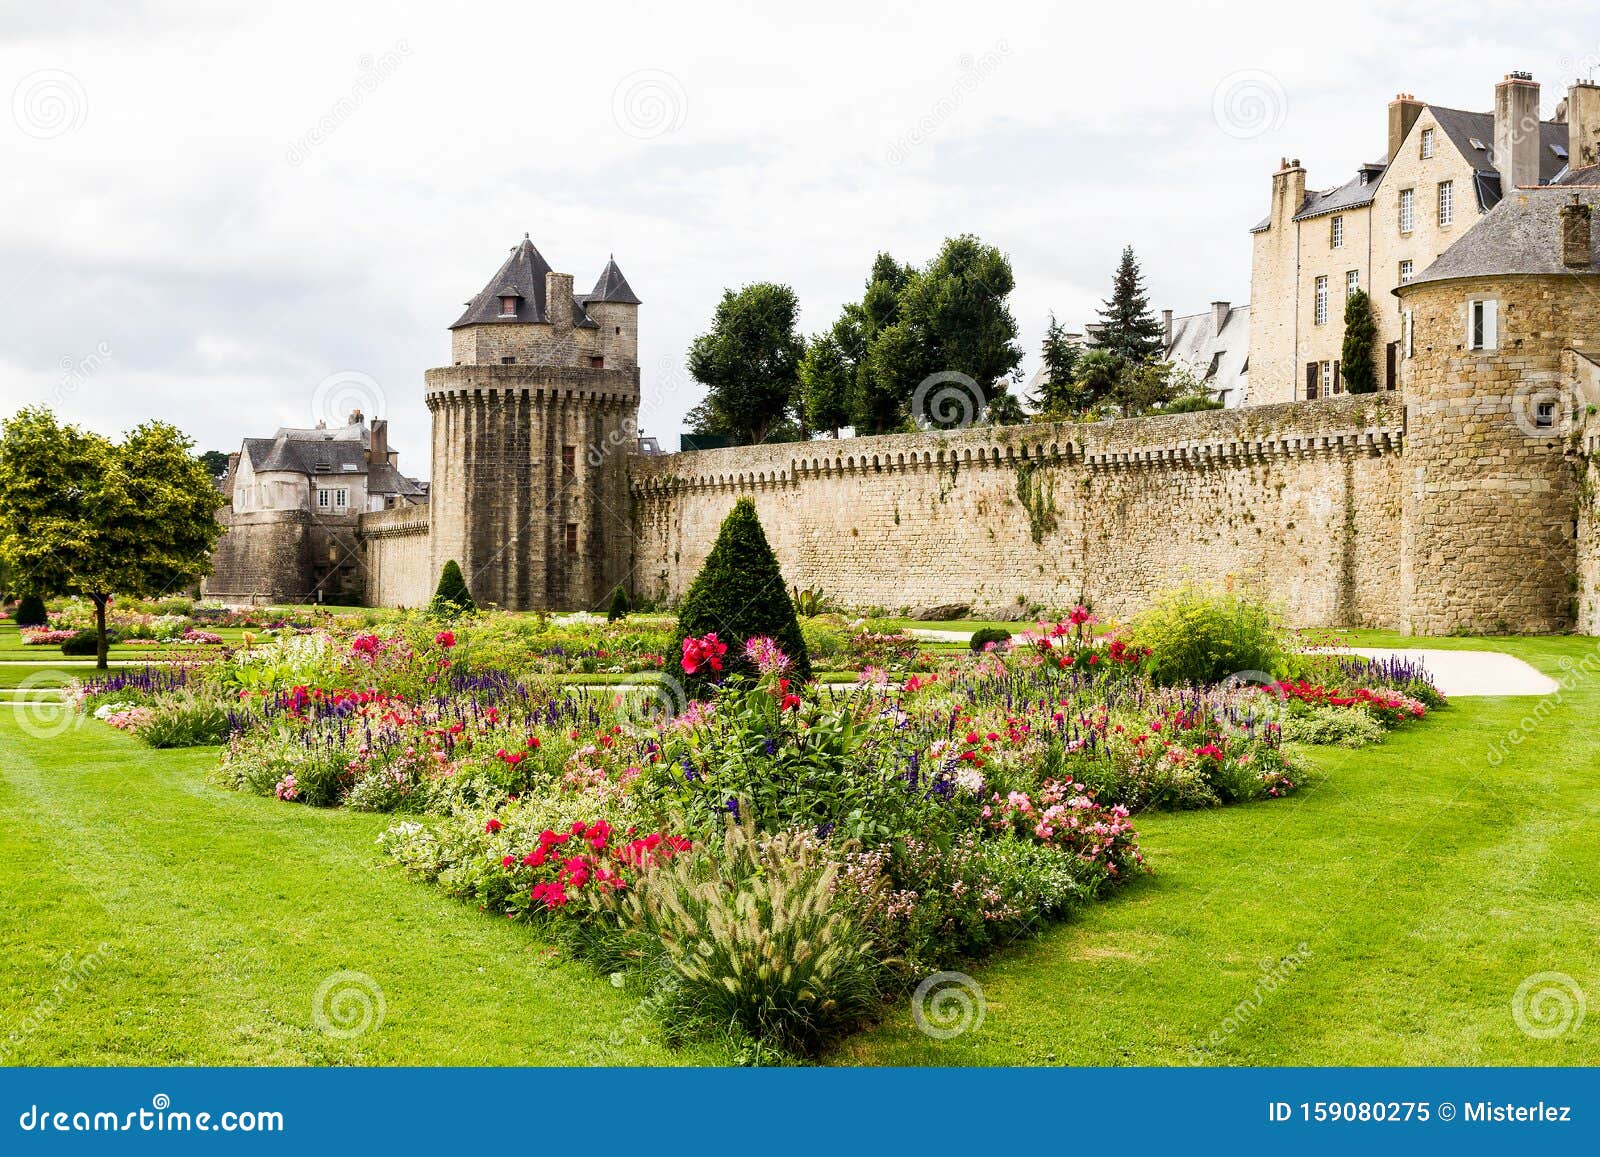 Medieval Ramparts and Gardens at Vannes, Brittany, France Stock Image